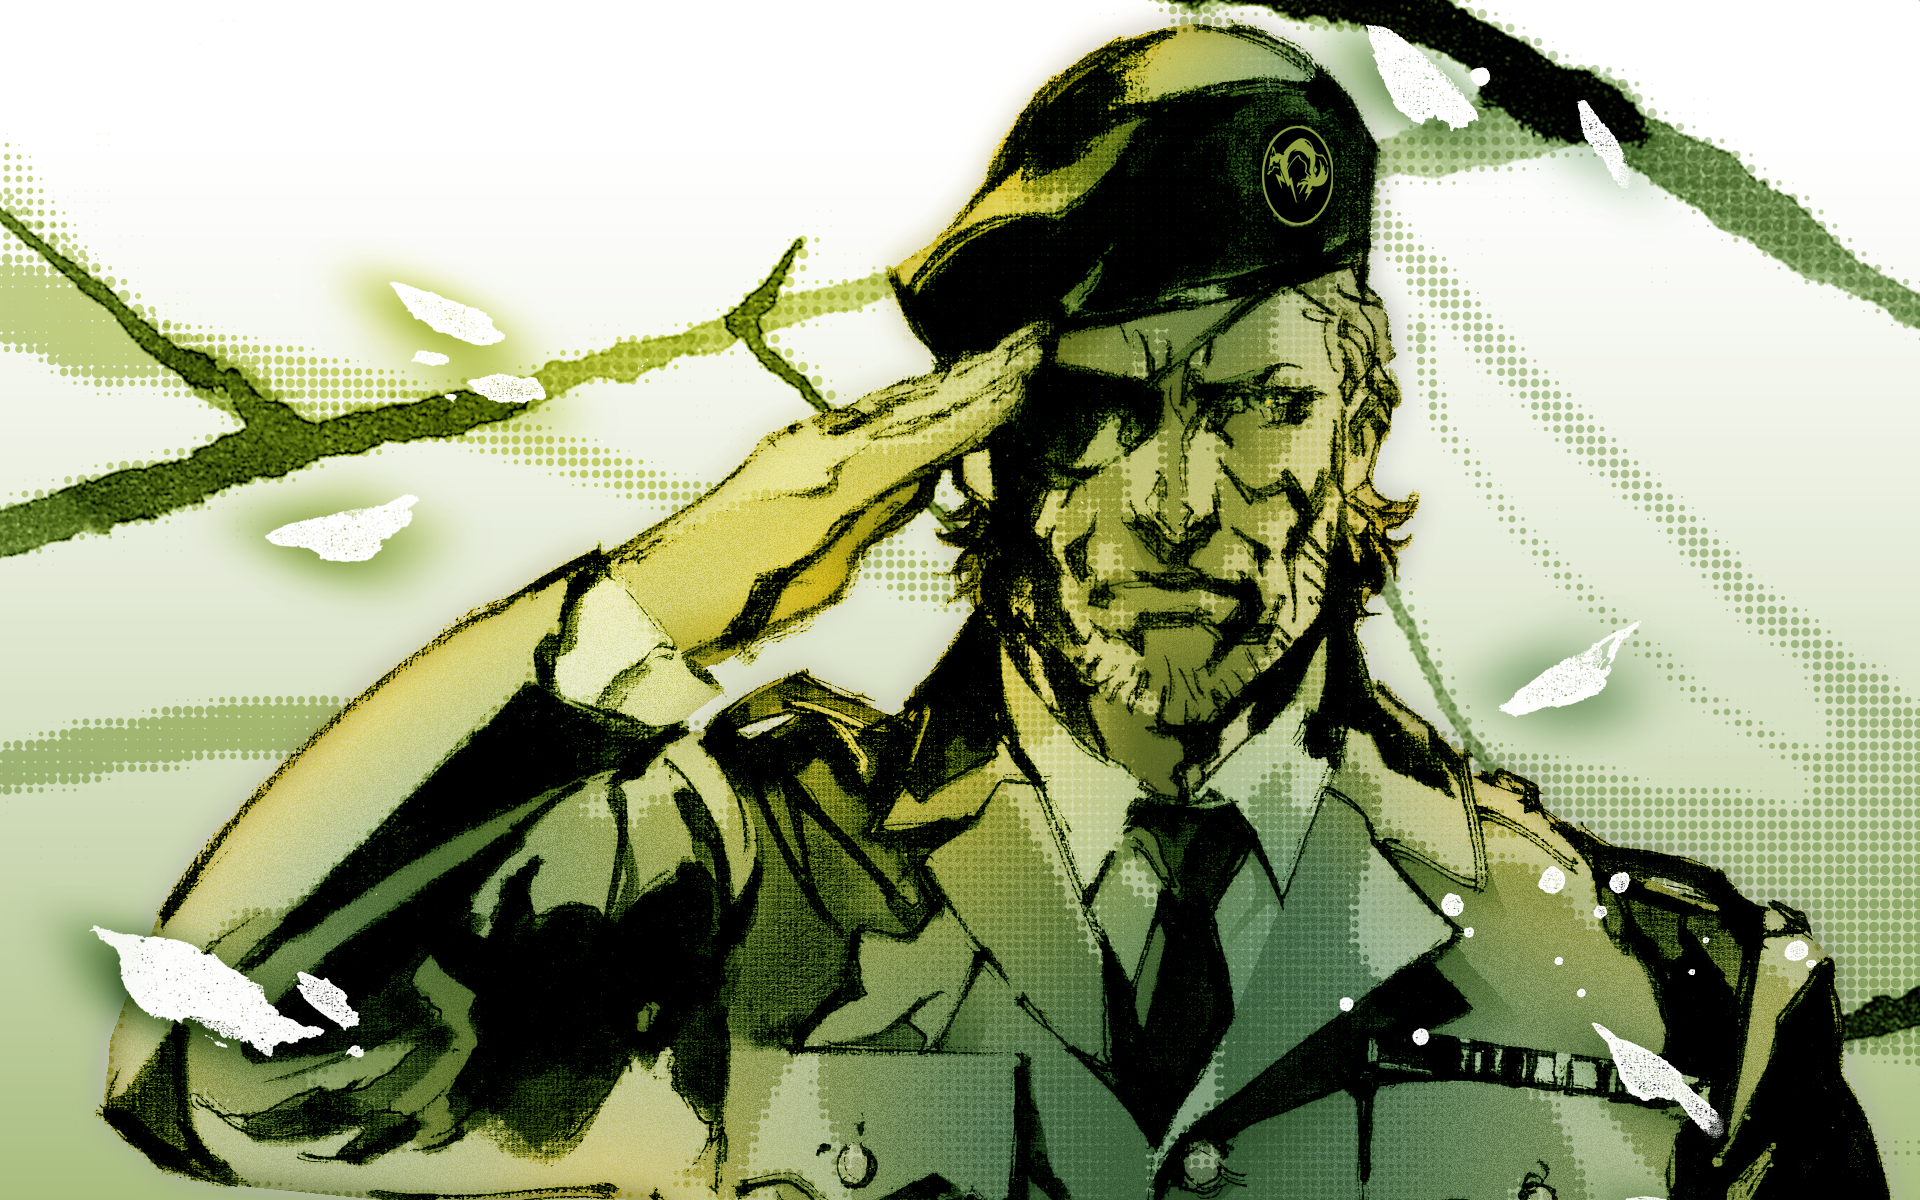 Big Boss is leading the charge